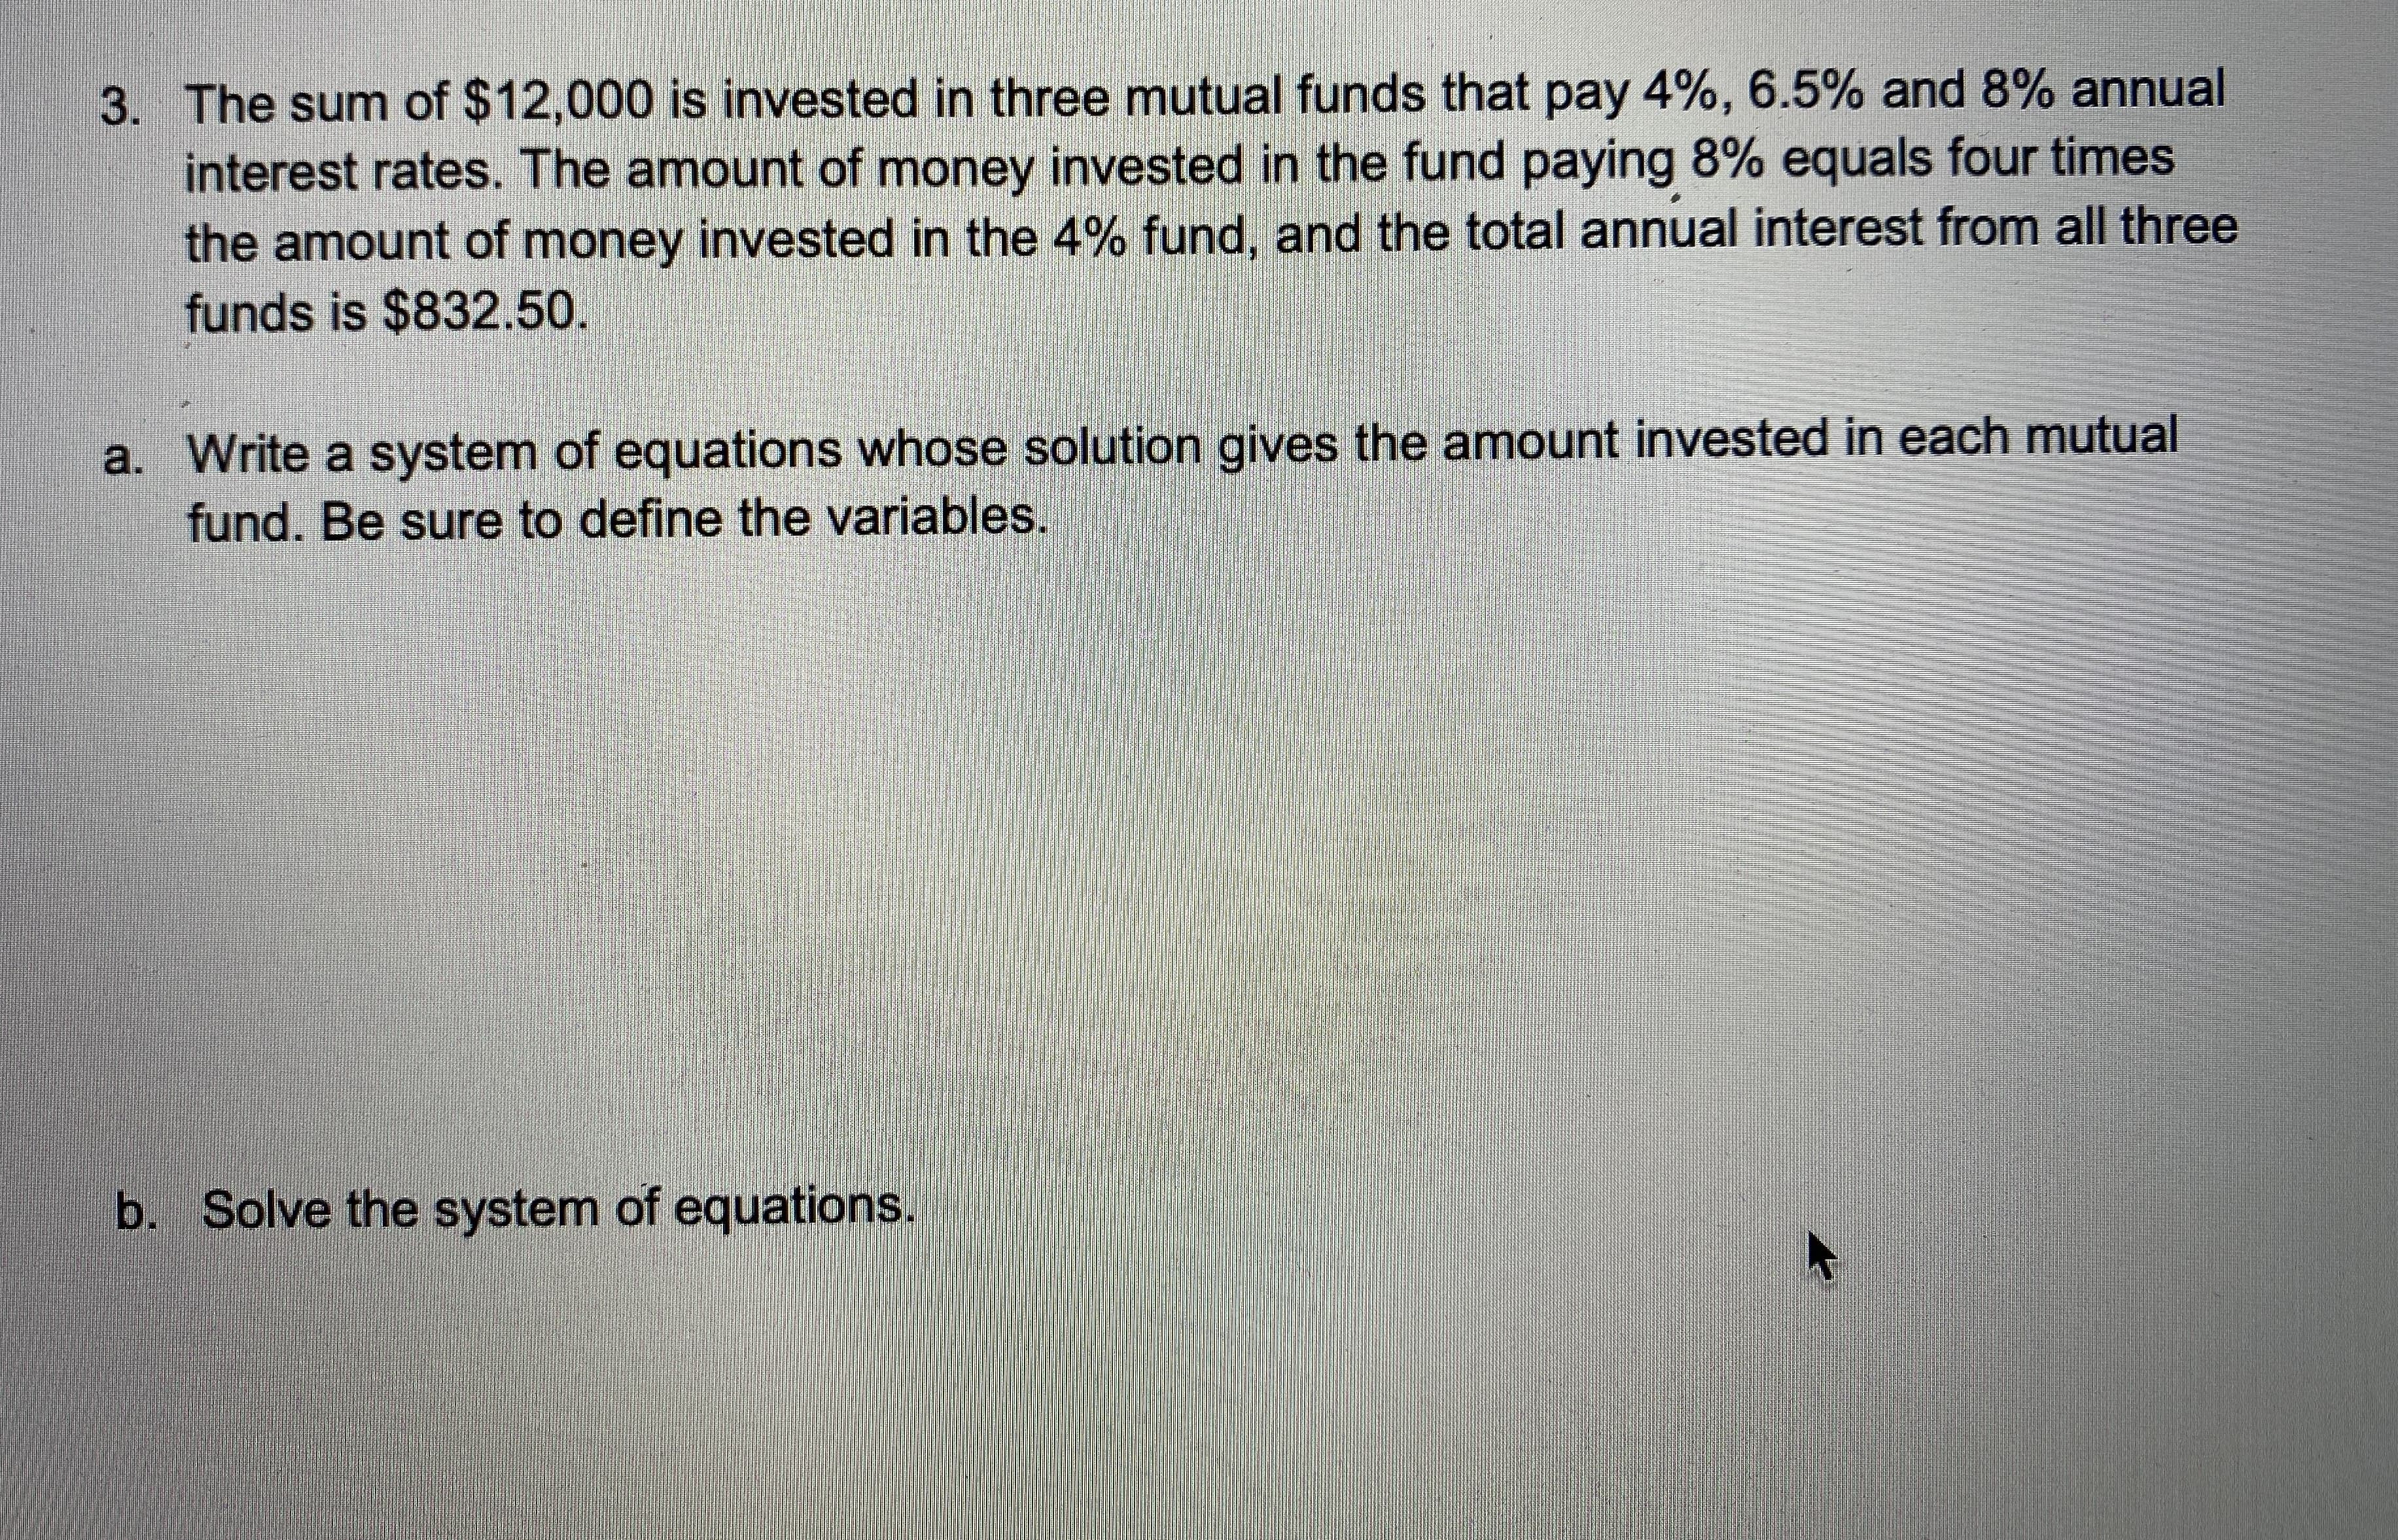 The sum of $12,000 is invested in three mutual funds that pay 4%, 6.5% and 8% annual
interest rates. The amount of money invested in the fund paying 8% equals four times
the amount of money invested in the 4% fund, and the total annual interest from all three
funds is $832.50.
